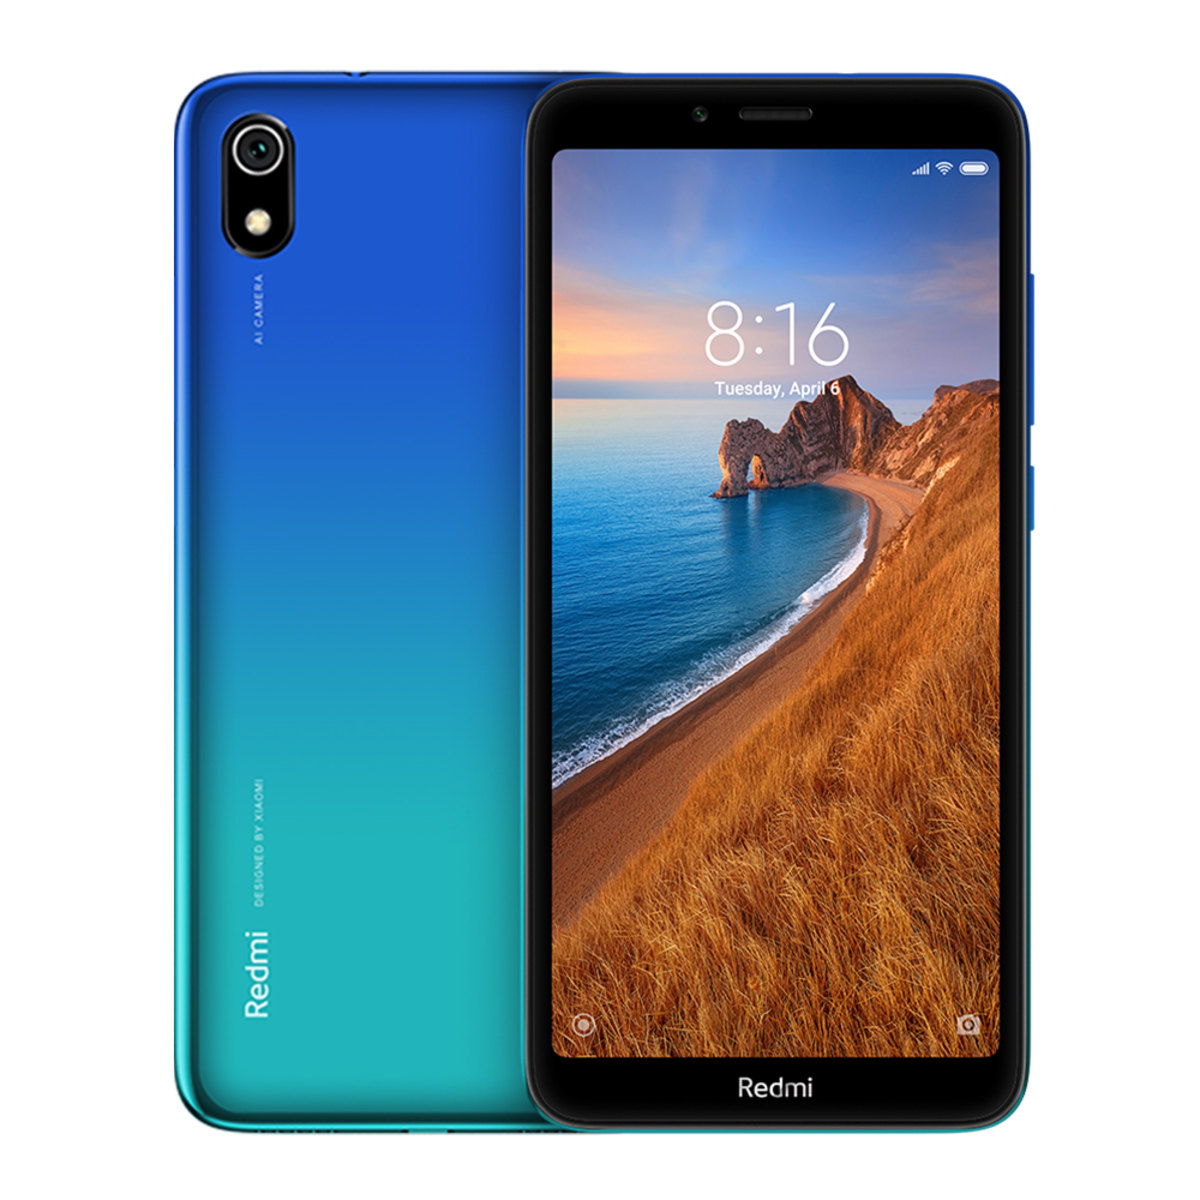 Xiaomi Redmi 7A Miui 11 Global Android 9 Pie ROM FASTBOOT (V11.0.7.0.PCMMIXM)